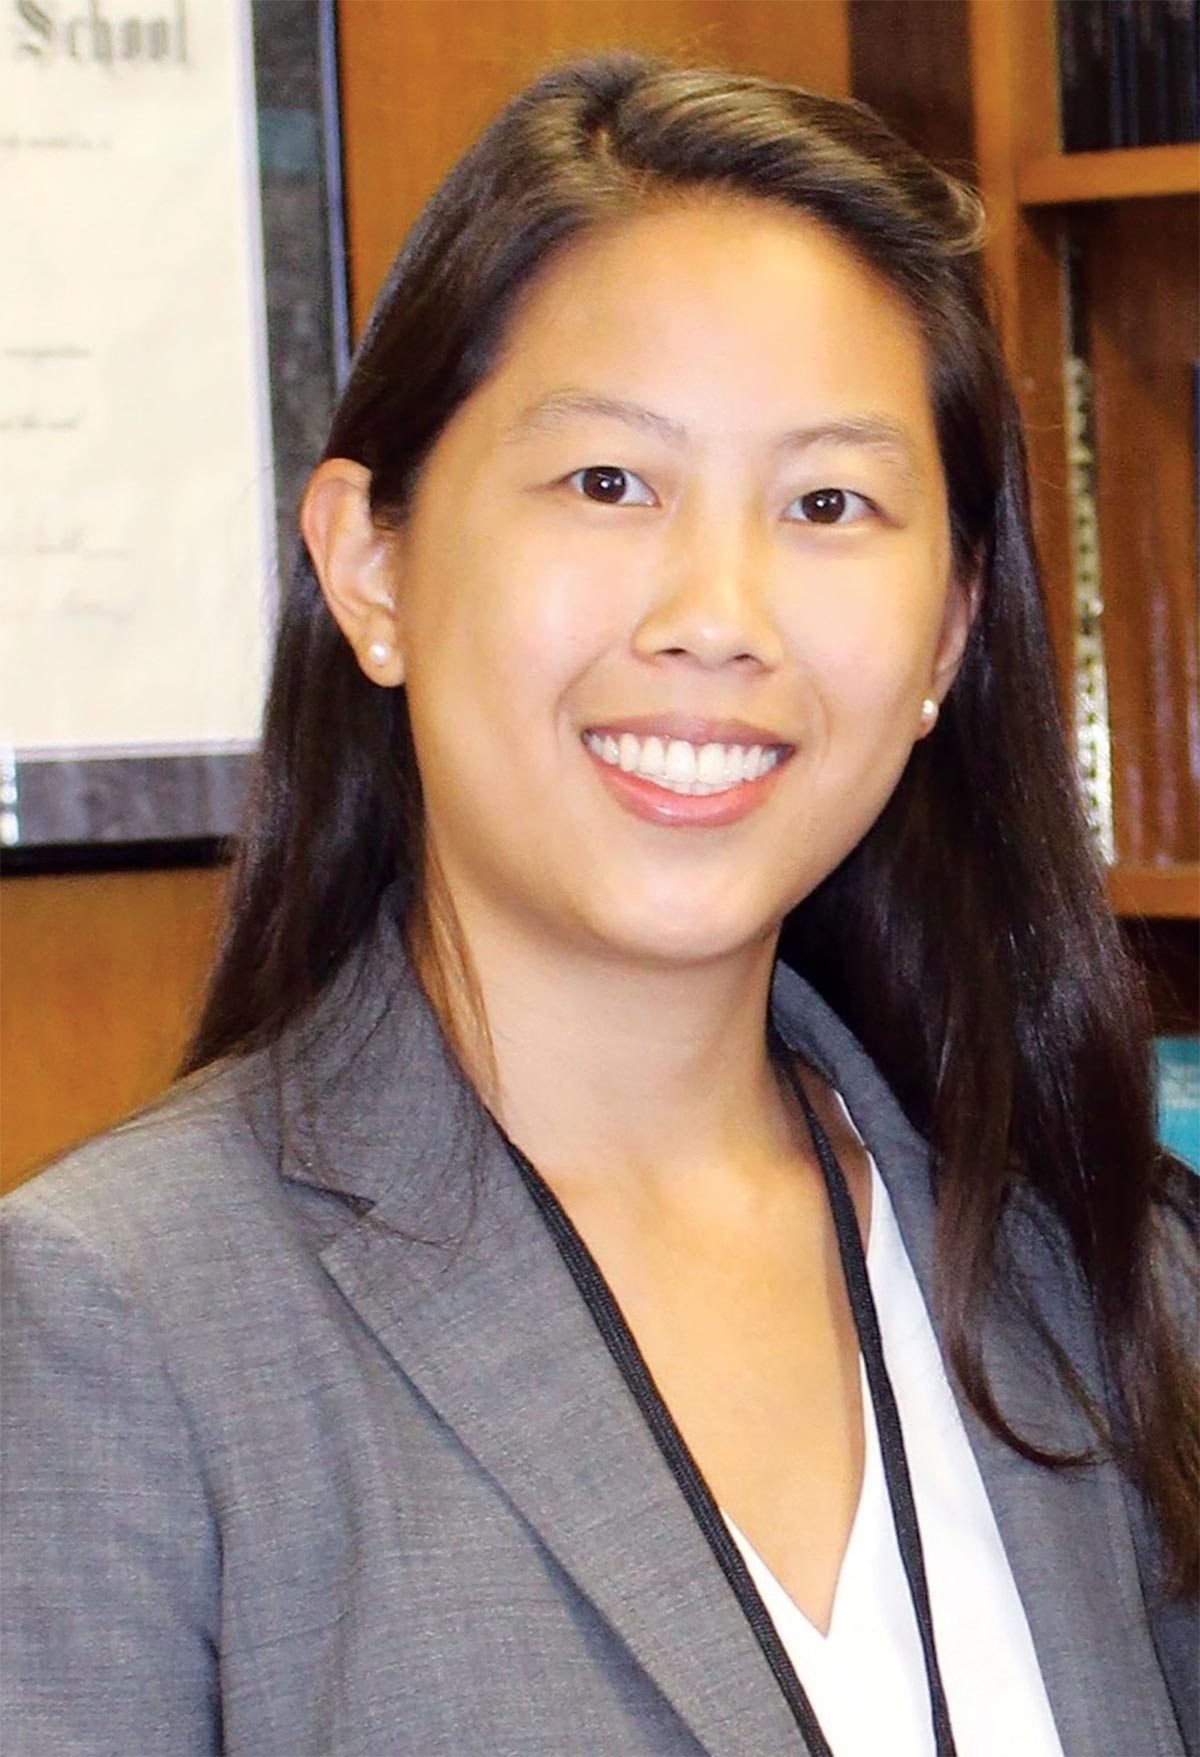 Margaret Chen ’12 smiling while wearing a grey suit jacket